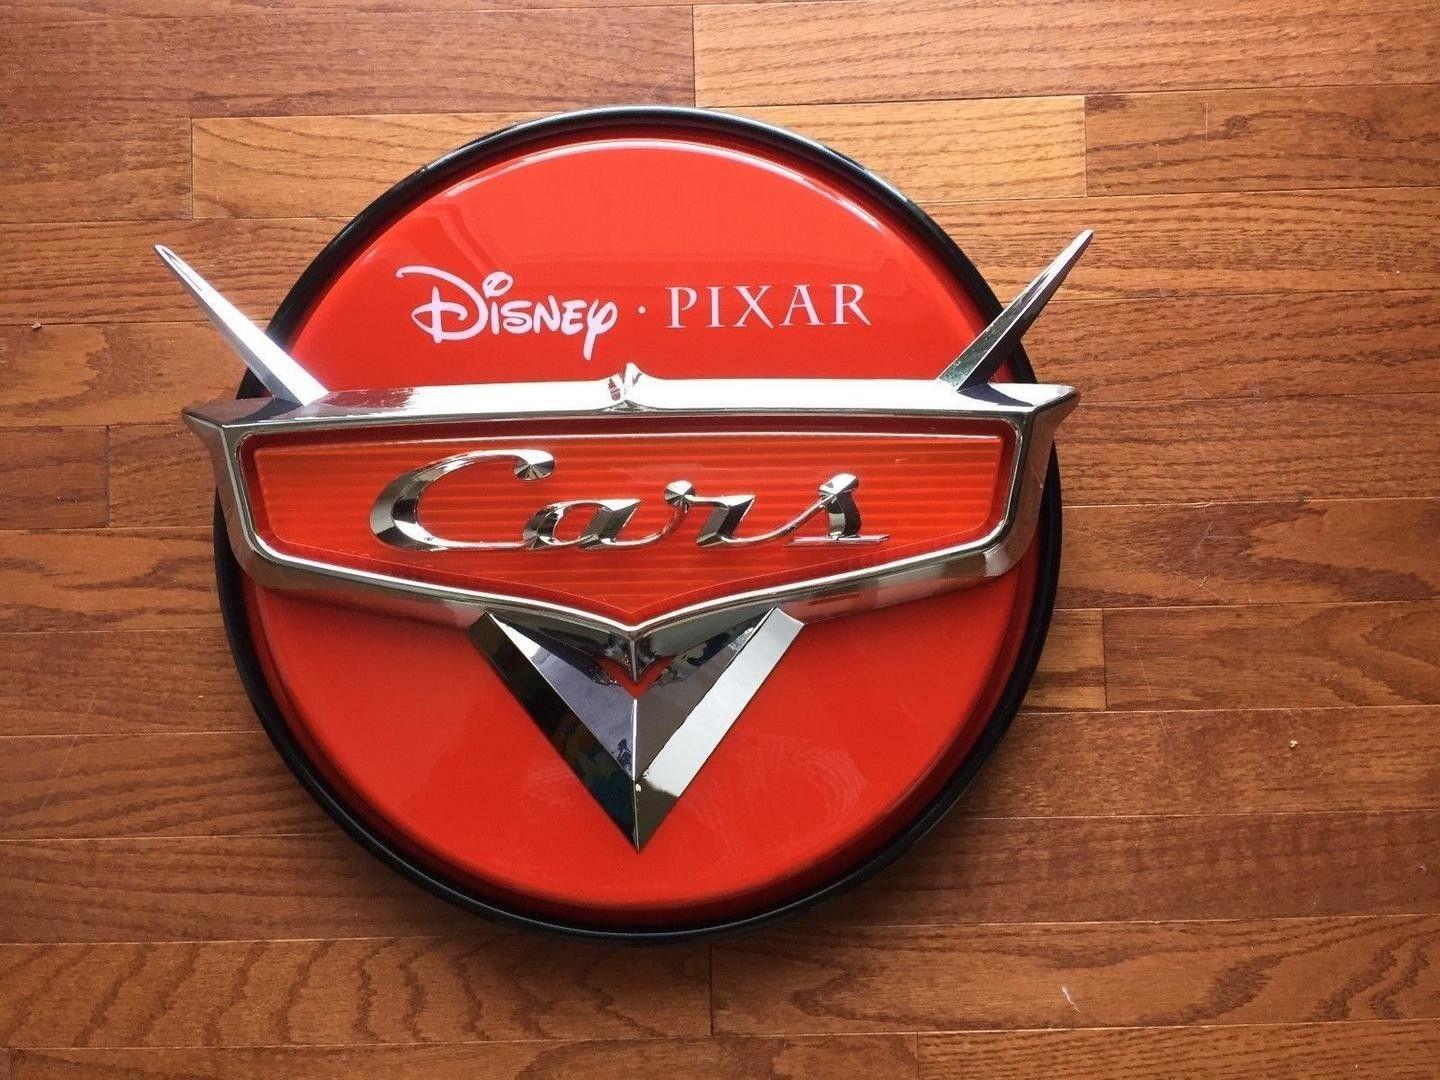 Disney Pixar Cars Logo - Disney Pixar Cars Logo Illuminated Sign BRAND NEW 100% Authentic